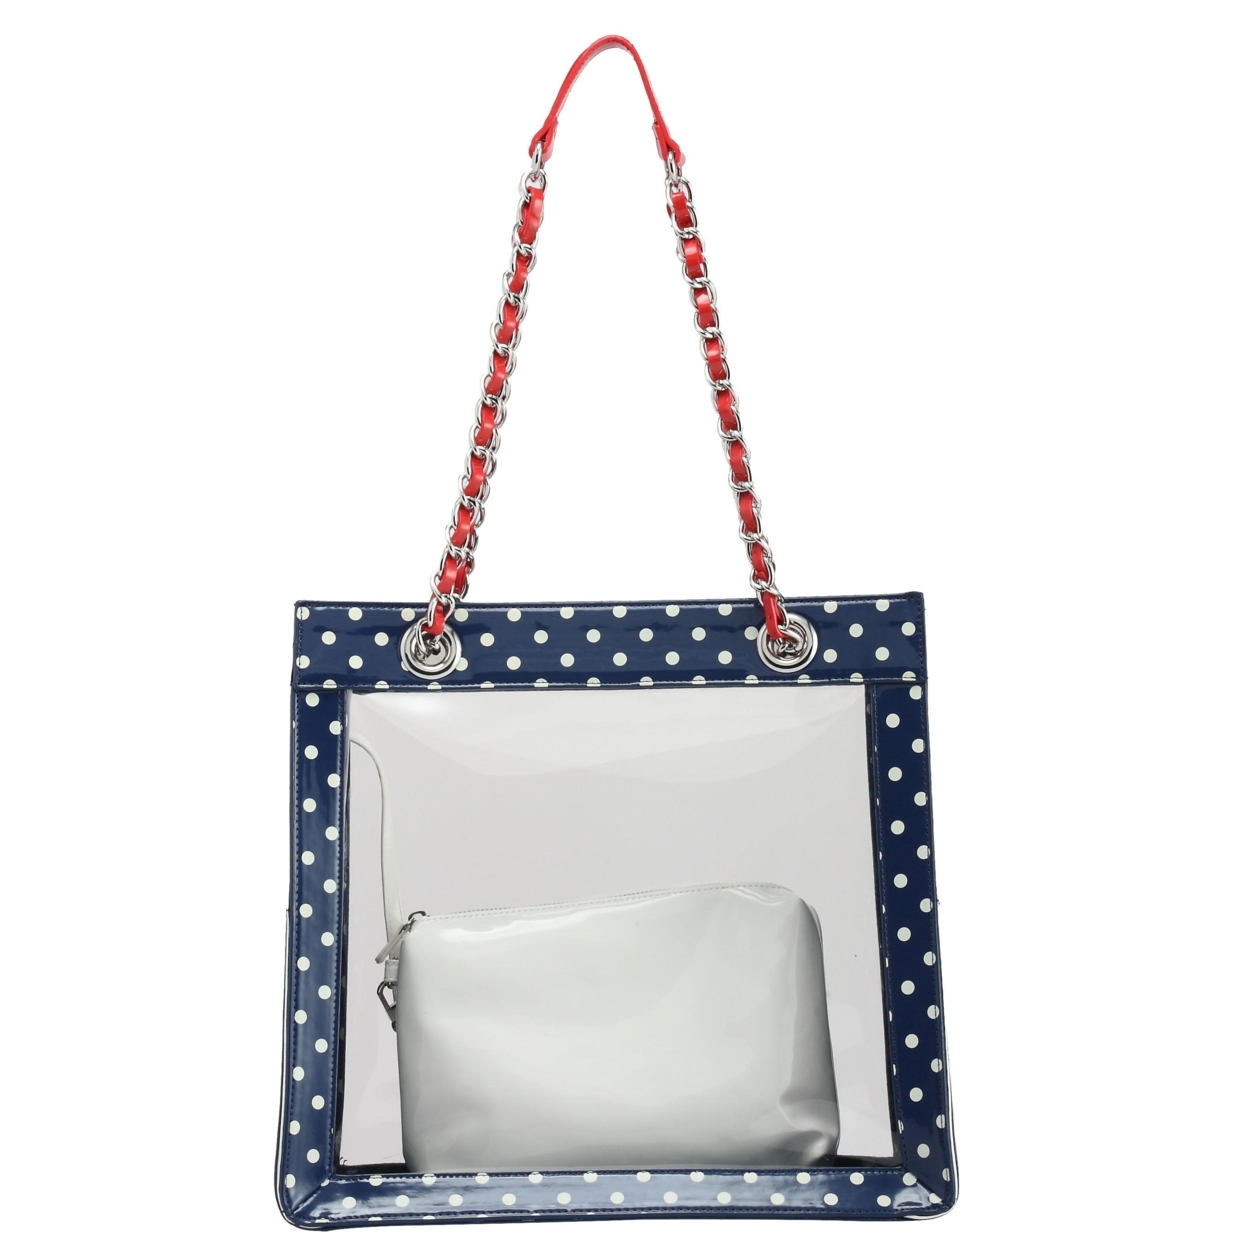 SCORE! Andrea Large Clear Designer Tote For School, Work, Travel - Navy Blue, White And Racing Red